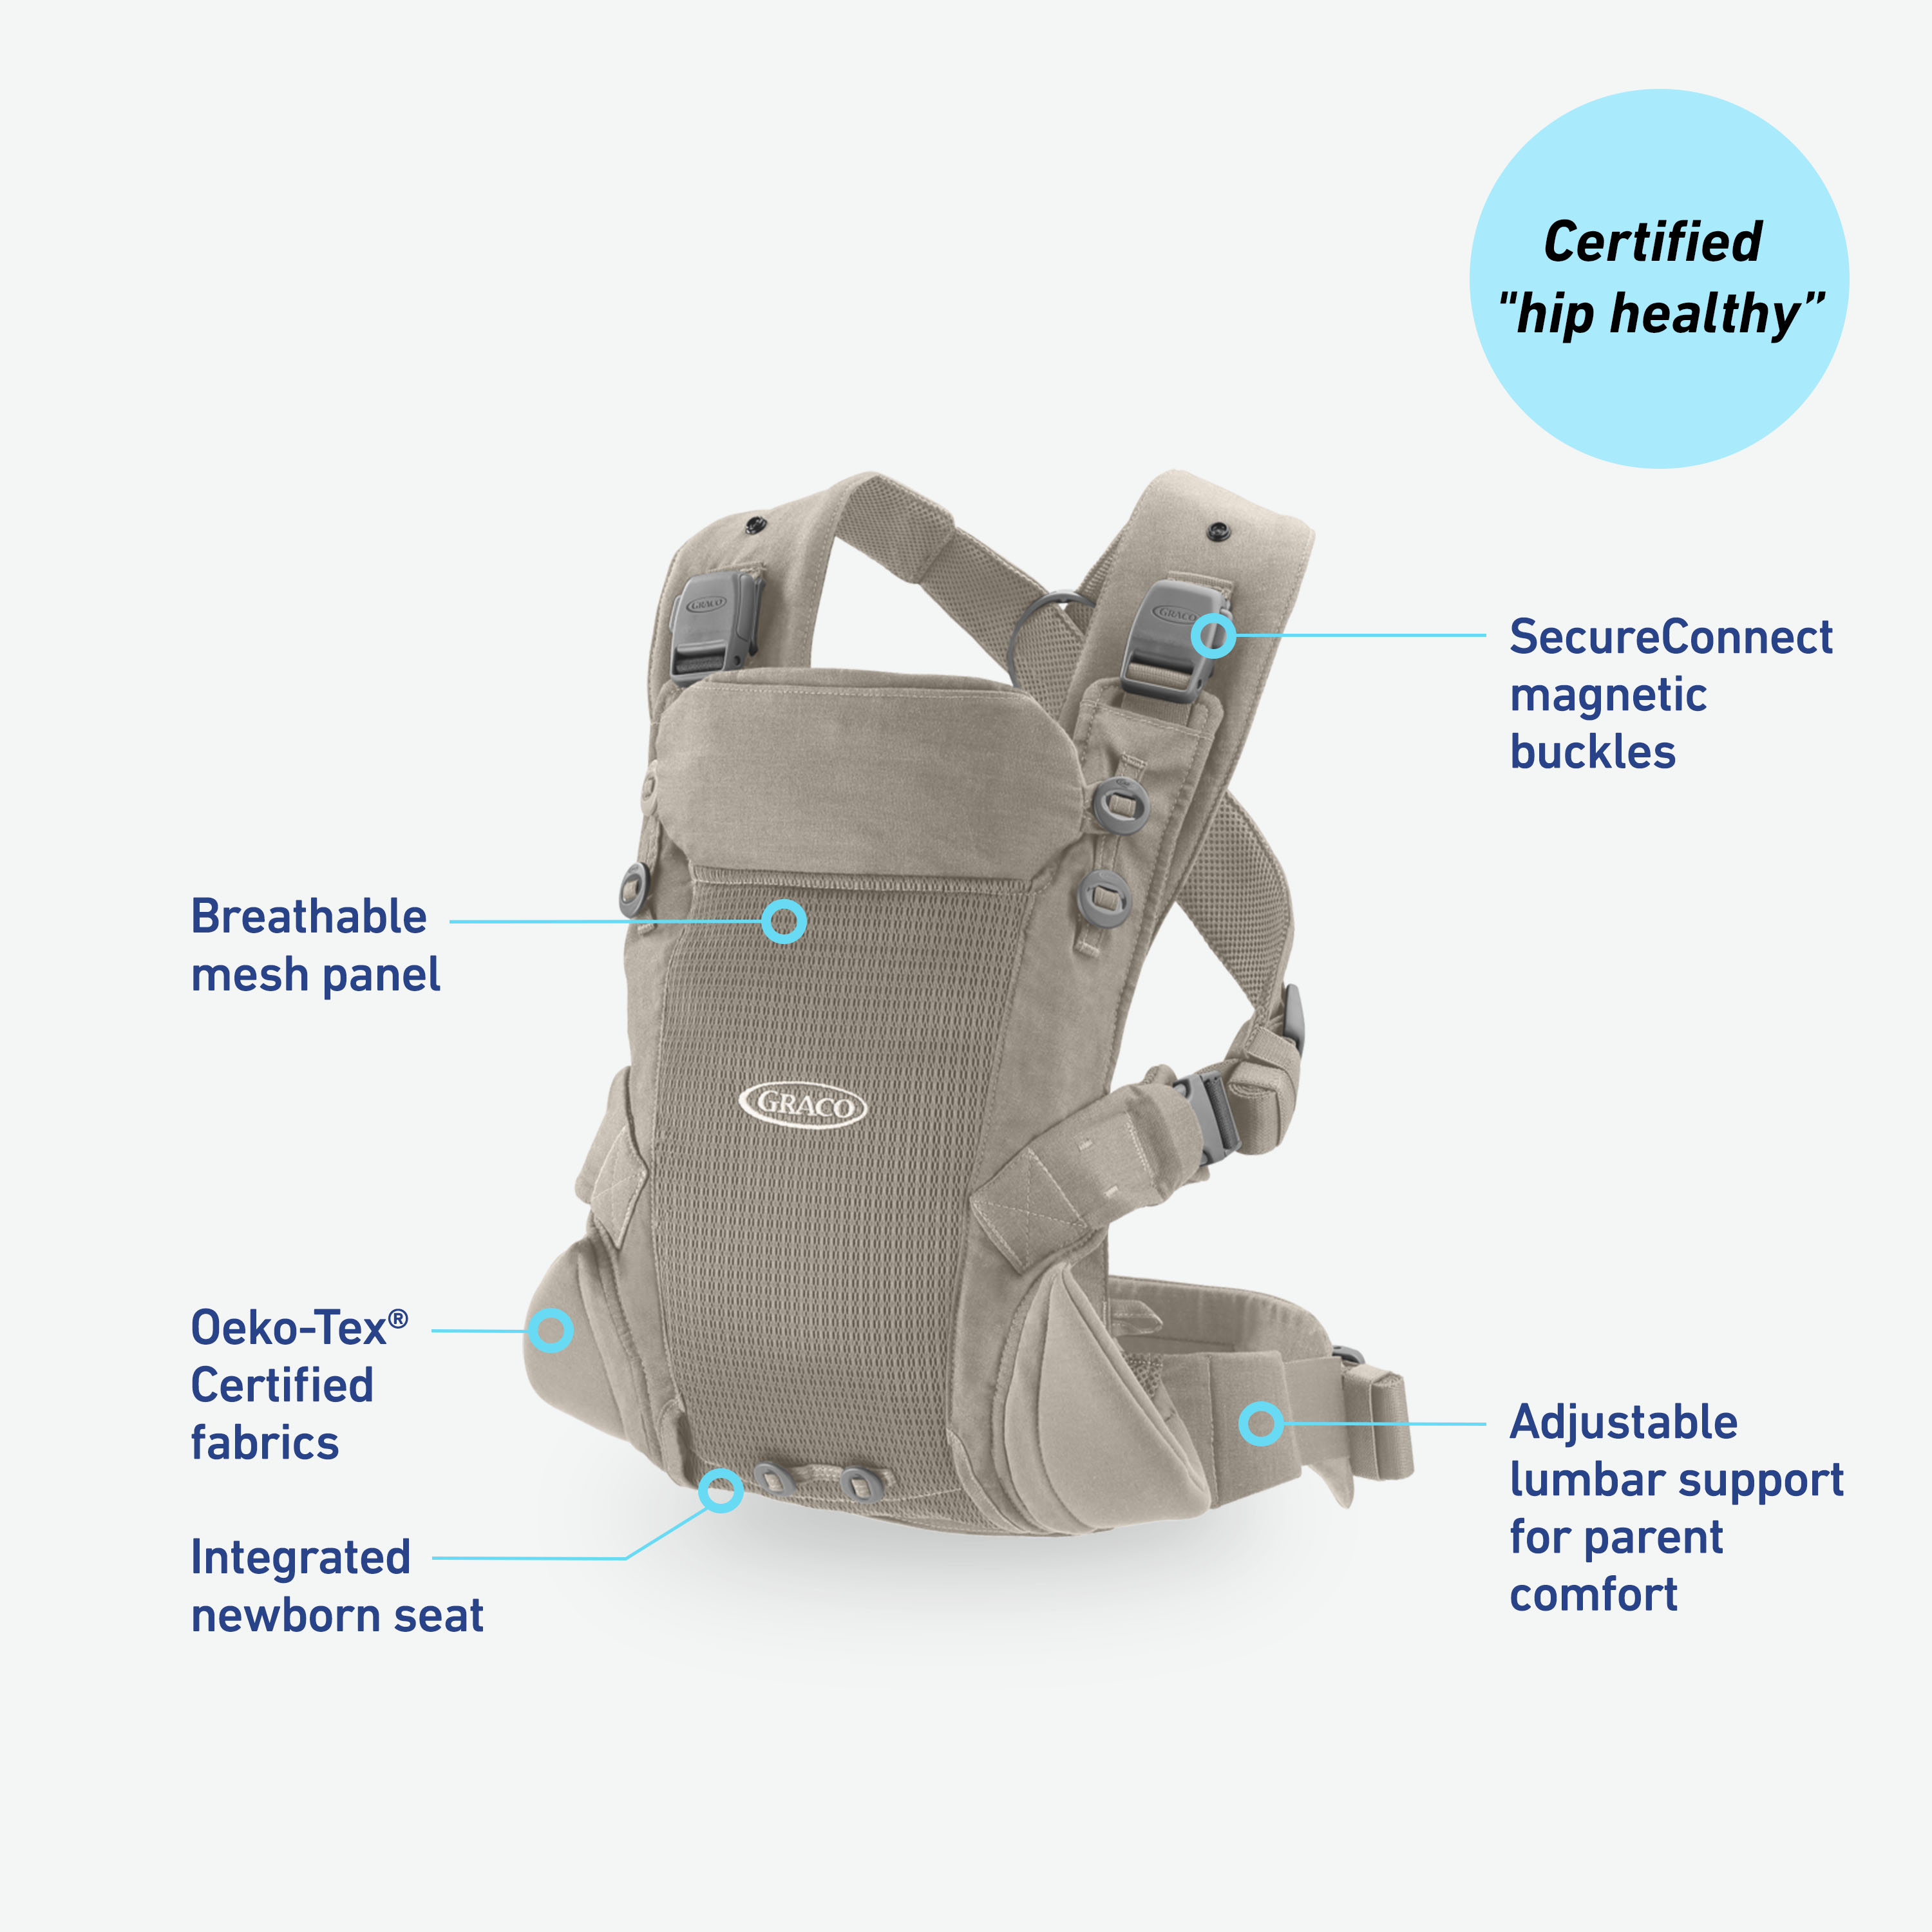 Graco Convertible Baby Carrier, Oatmeal, One Size Fits All - image 5 of 8